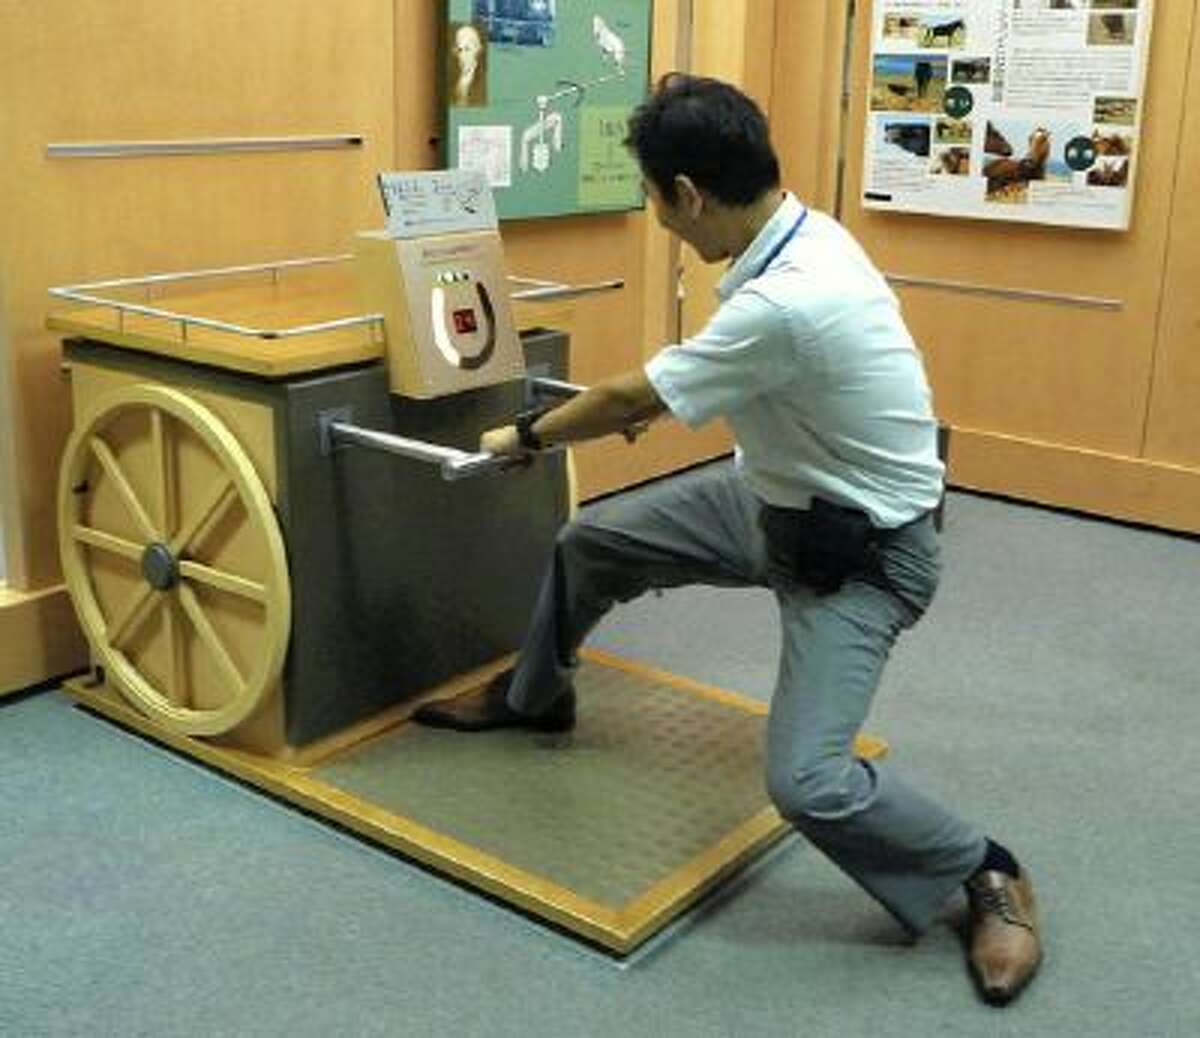 An unusual exhibit at the Equine Museum of Japan in Yokohama is a device that can measure people's physical strength in terms of horsepower. One horsepower is equal to the power used to pull 75 kilograms over one meter in one second.